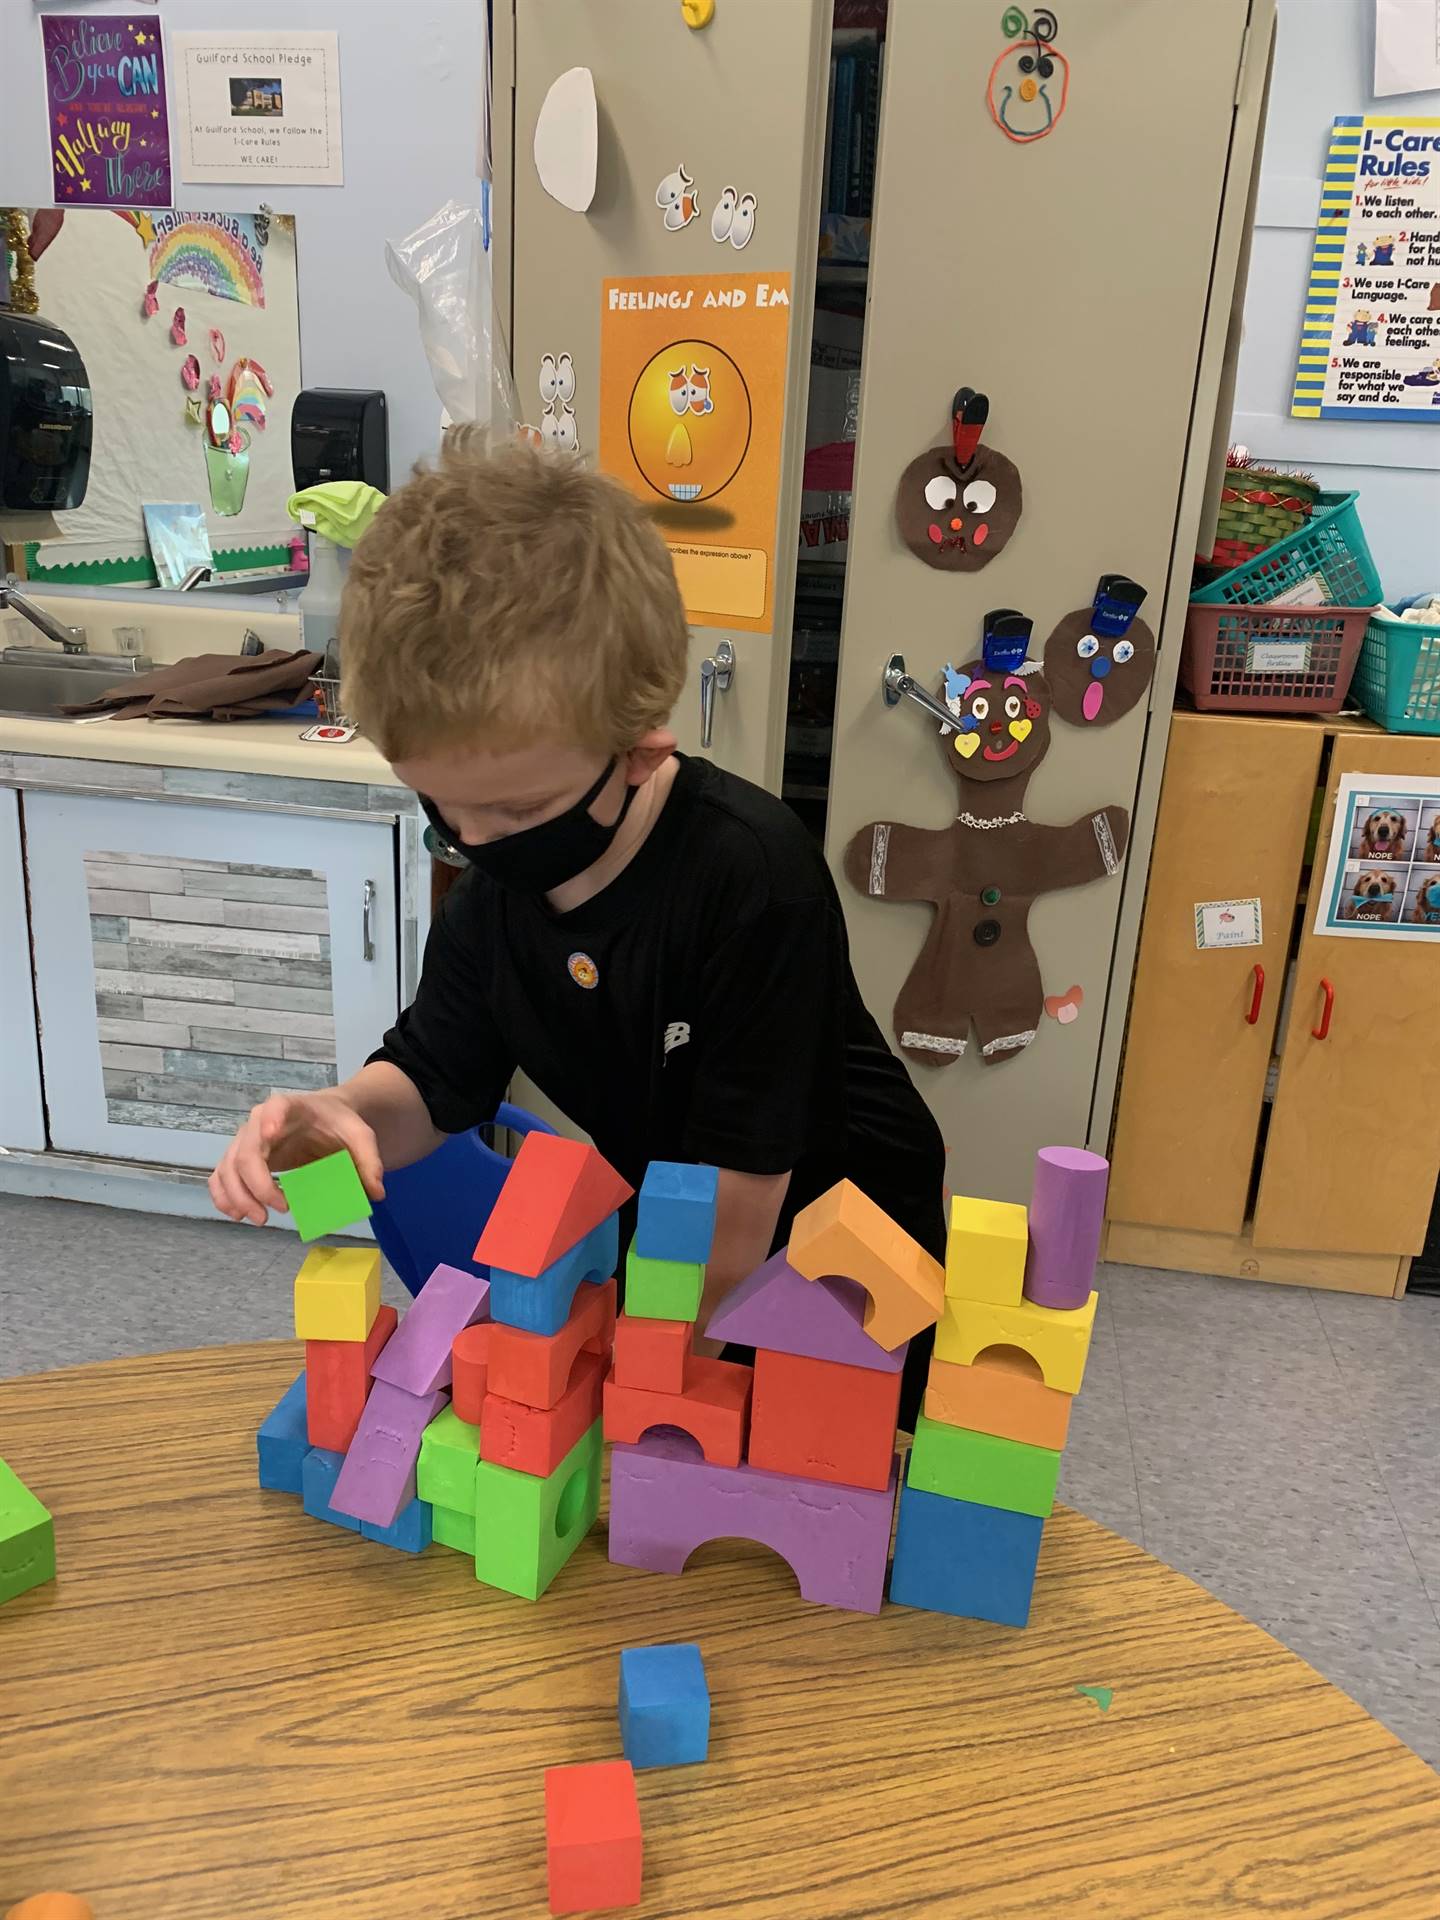 A student places a block on a structure he is building.